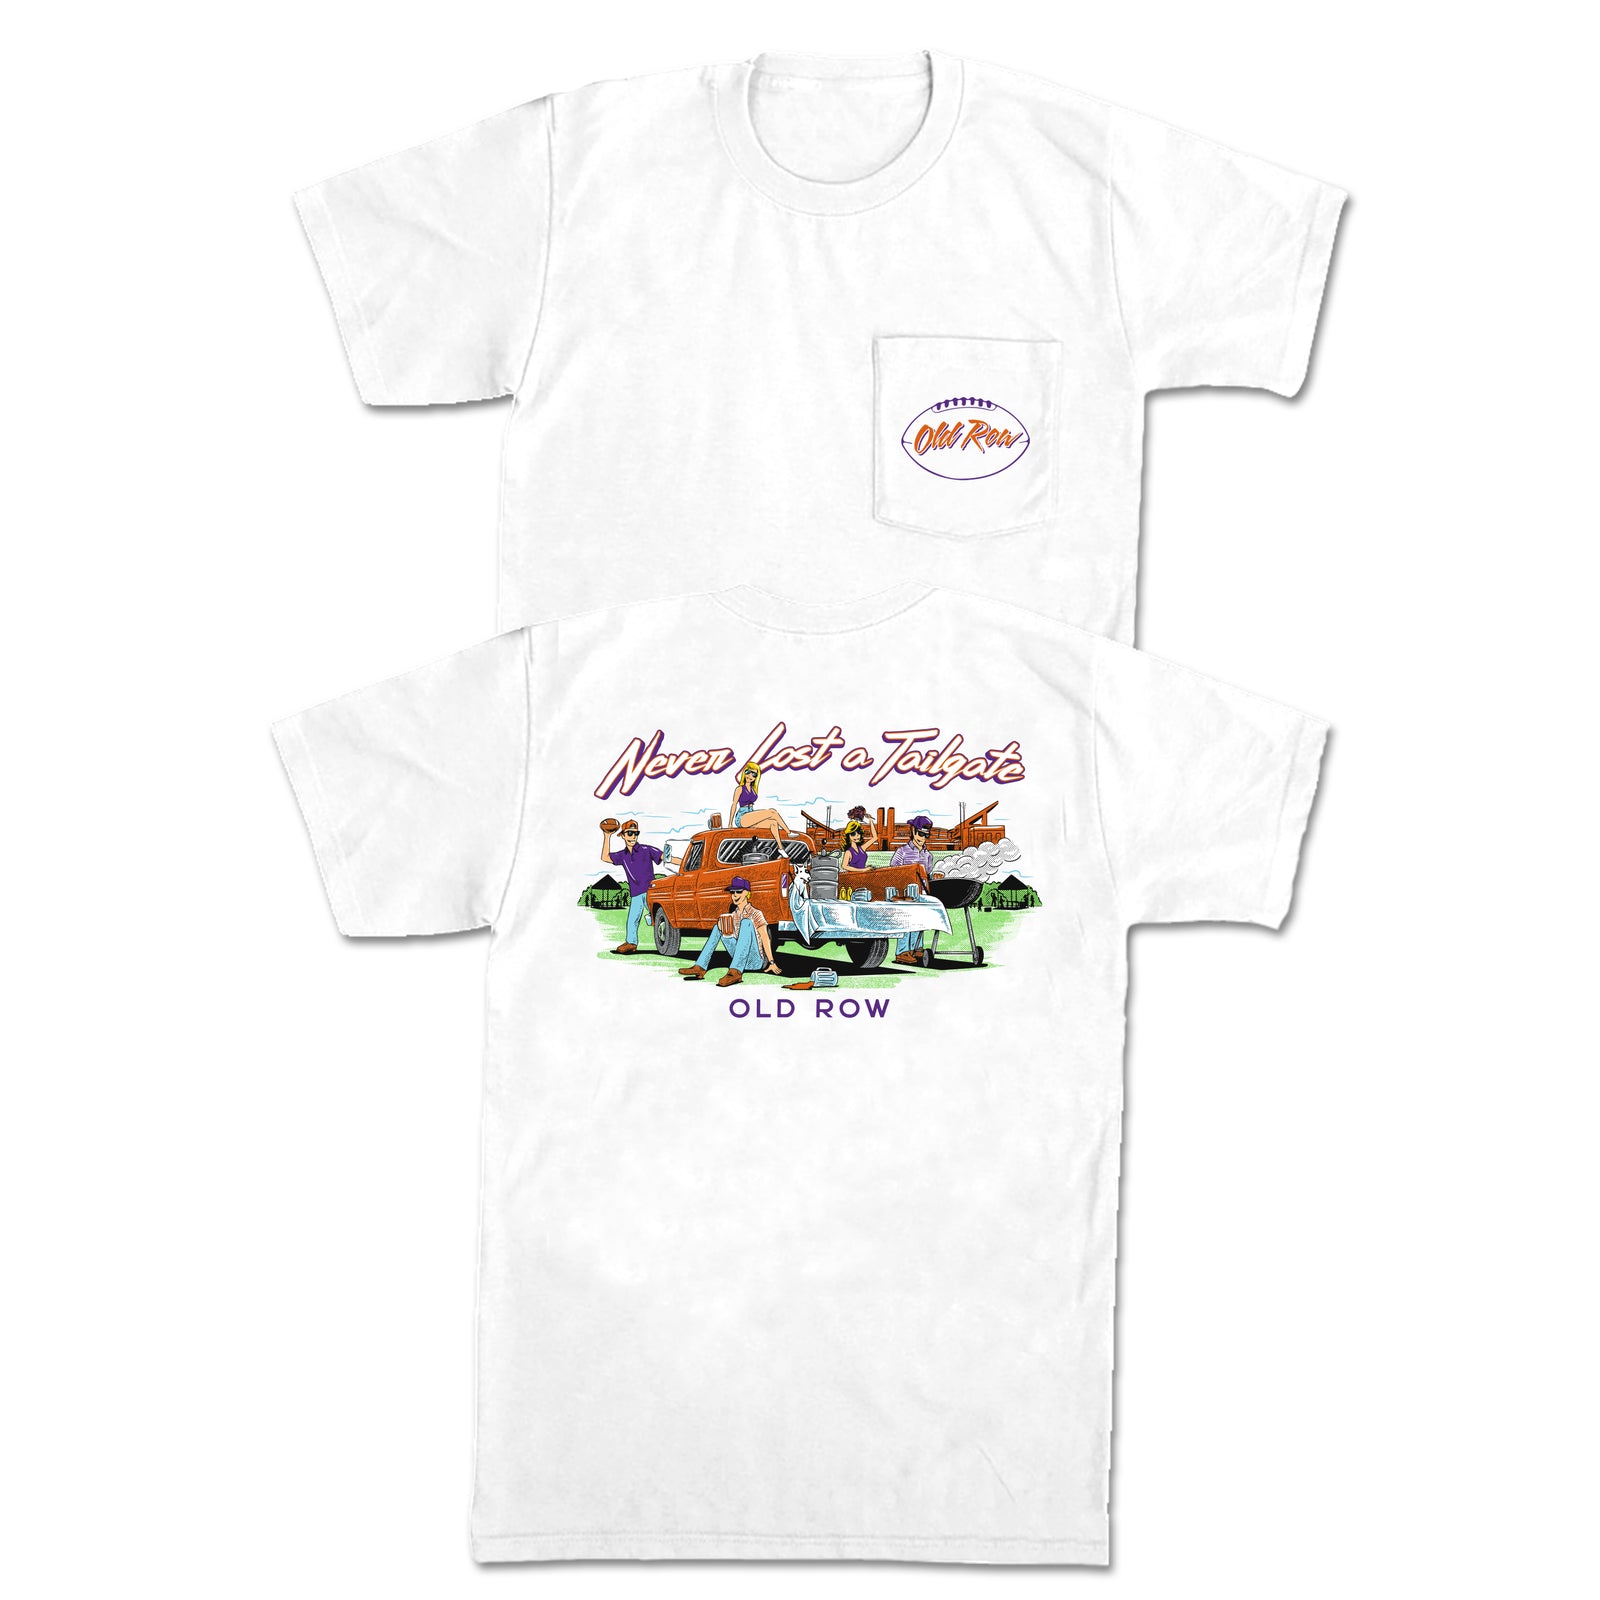 Never Lost A Tailgate Tiger Town, SC Pocket Tee